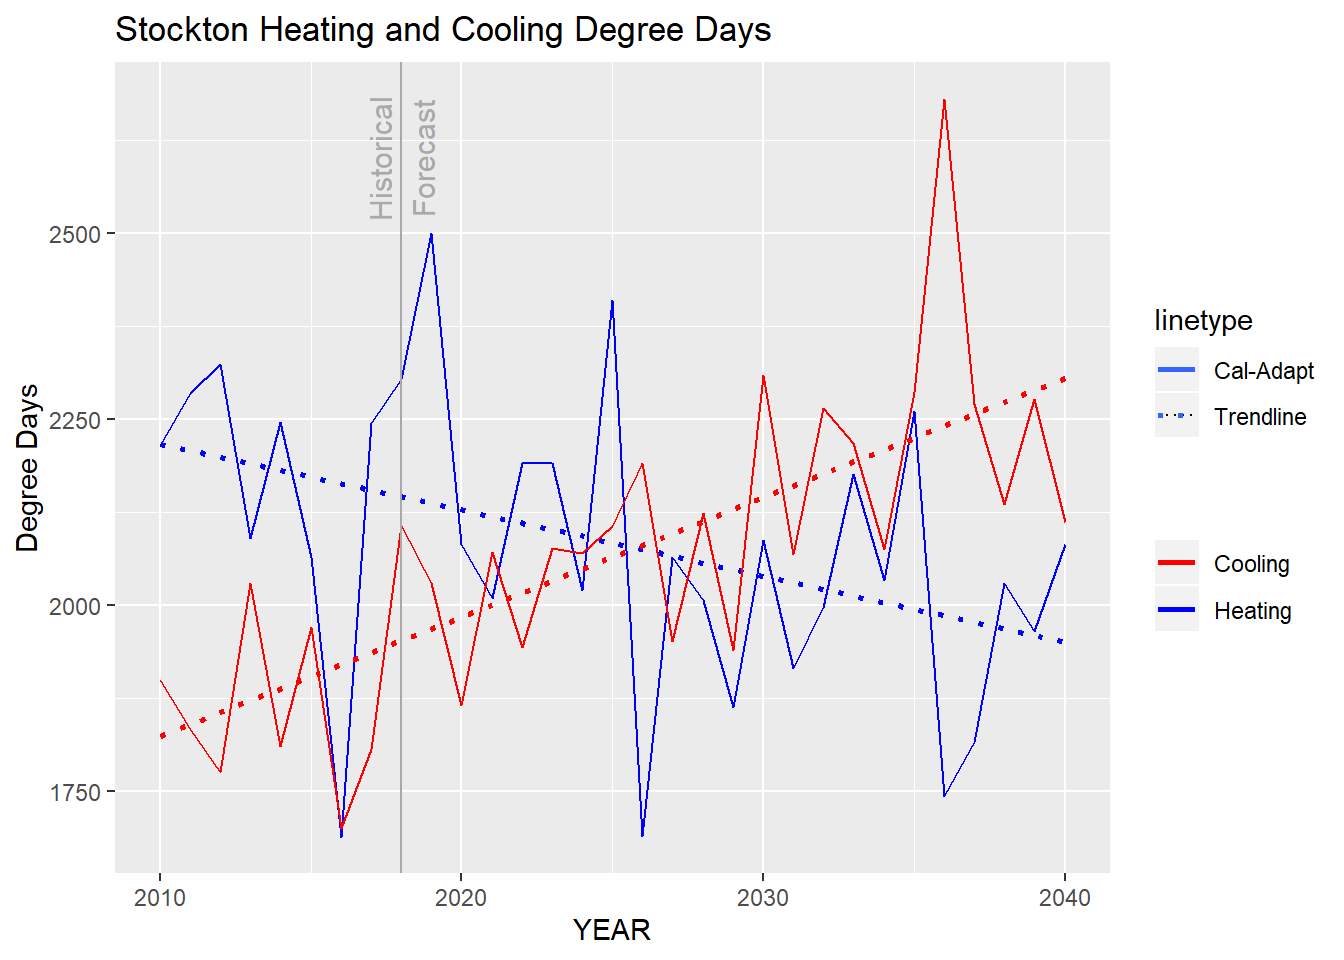 Stockton heating and cooling degree days under RCP 4.5 scenario, 2010 to 2040. Data from Cal-Adapt.